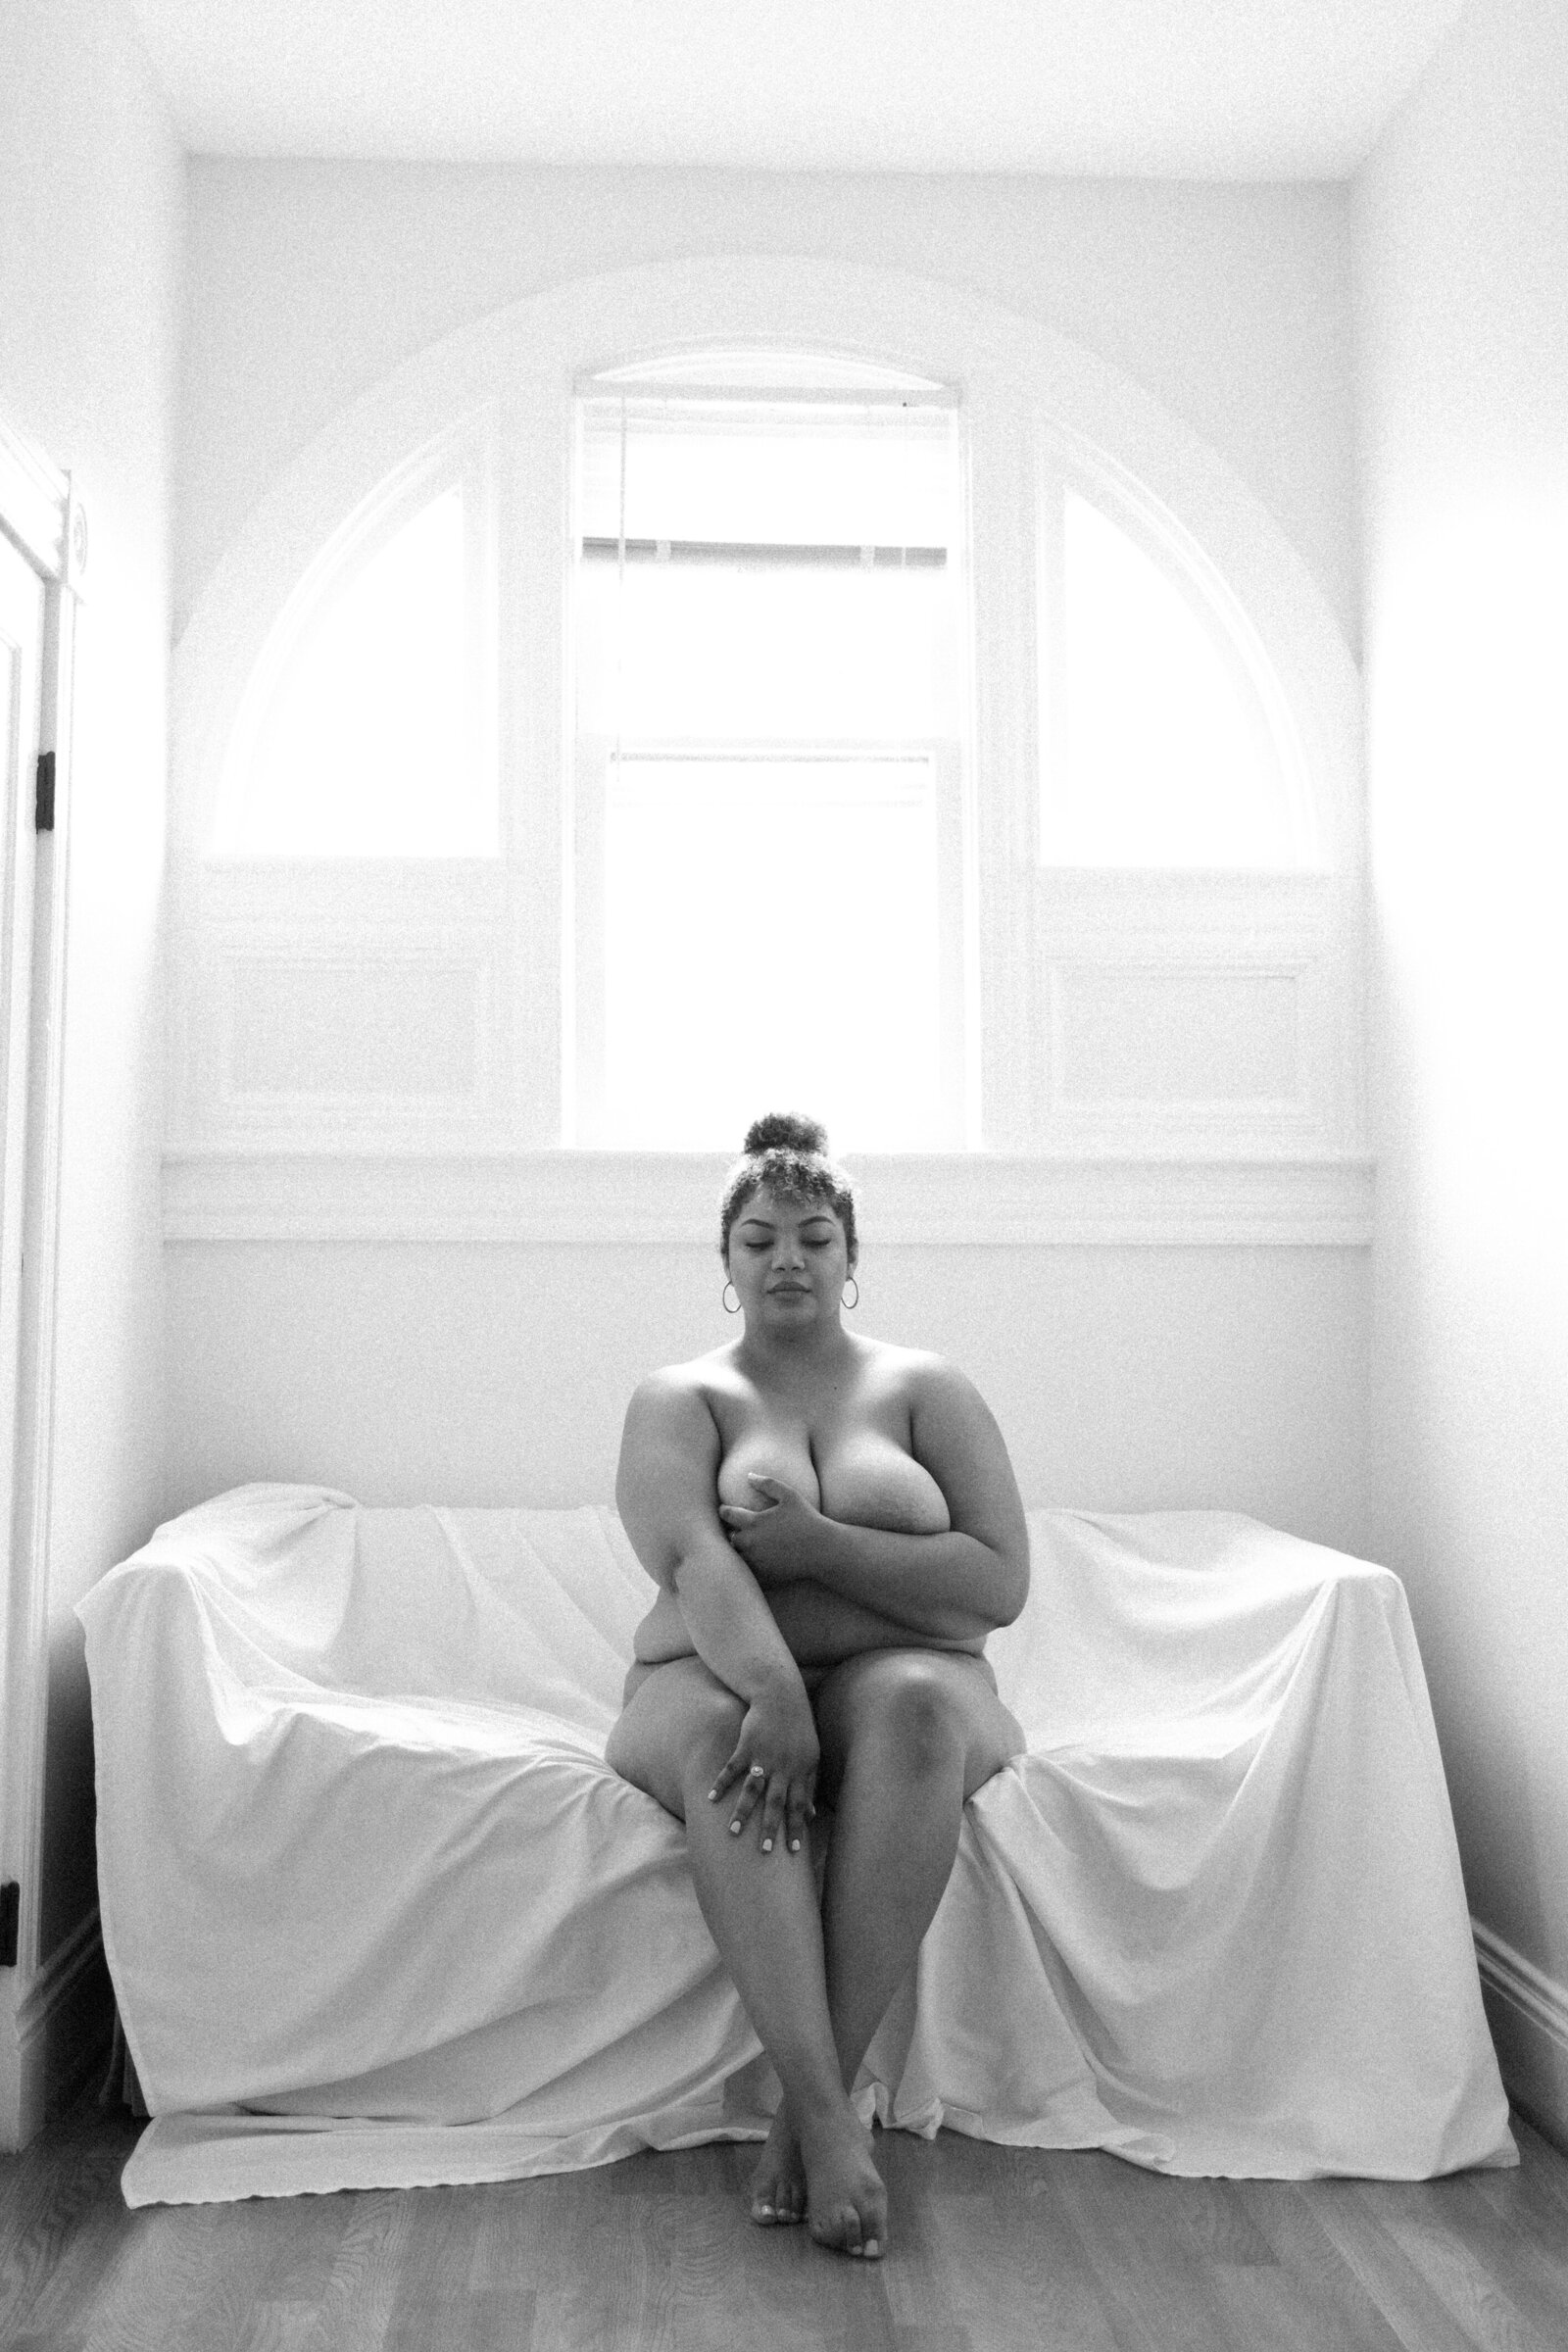 Black and white boudoir photo of woman sitting on a bed